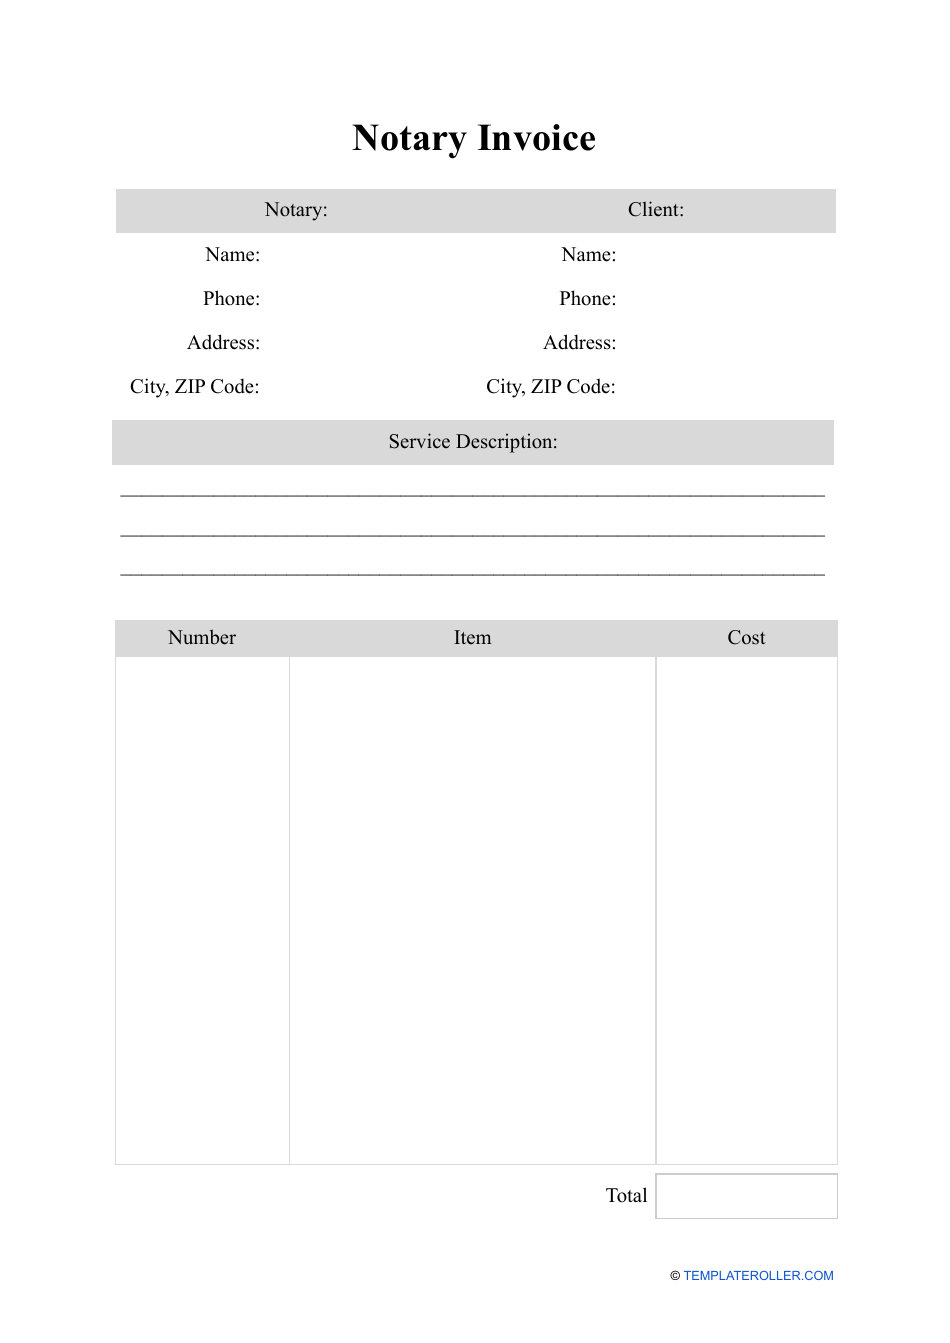 invoice-template-notary-how-invoice-template-notary-can-increase-your